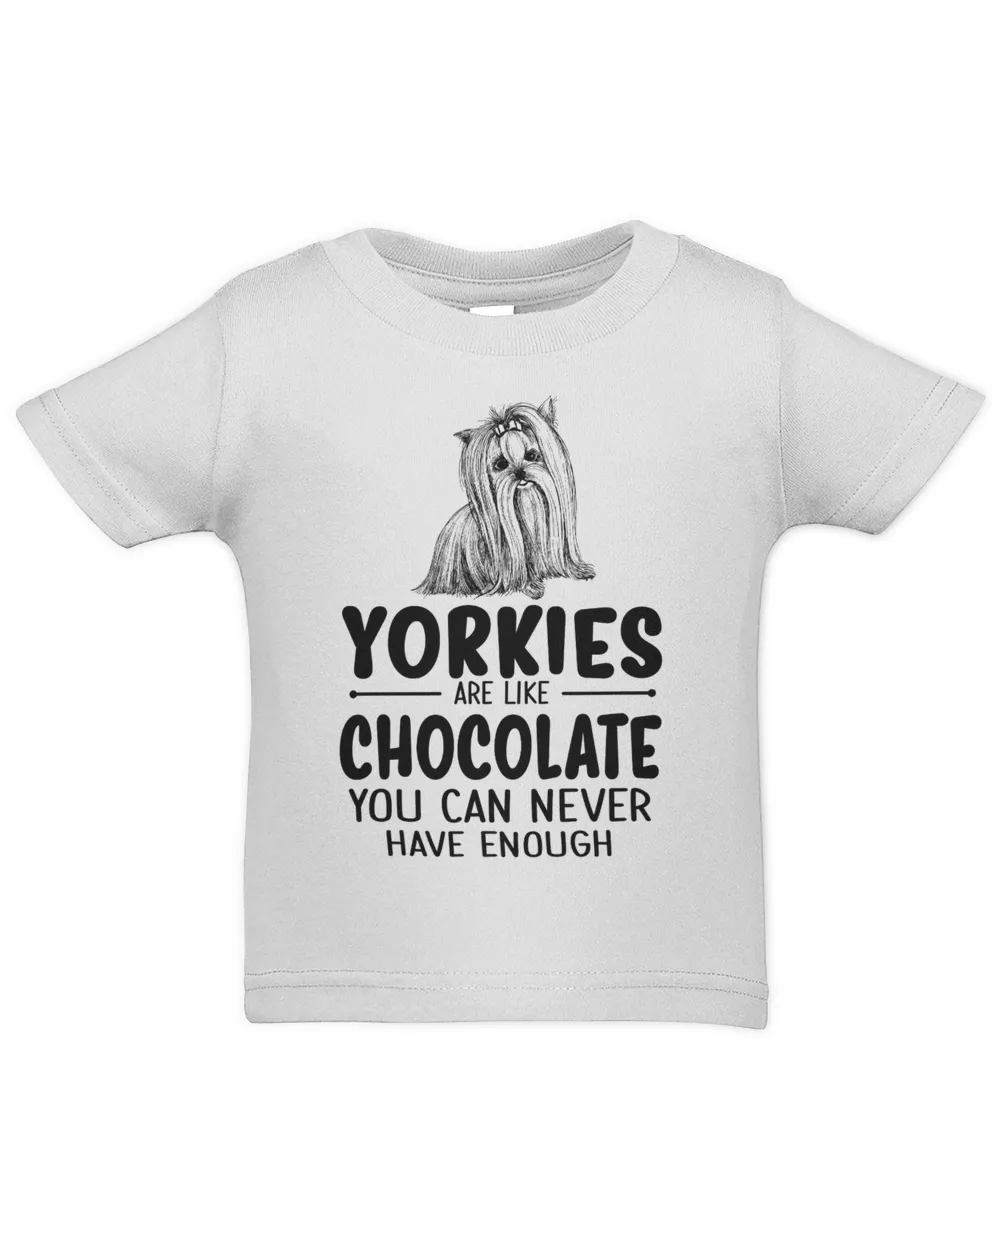 Yorkies are Like Chocolate You Can Never Have Enough t shirt